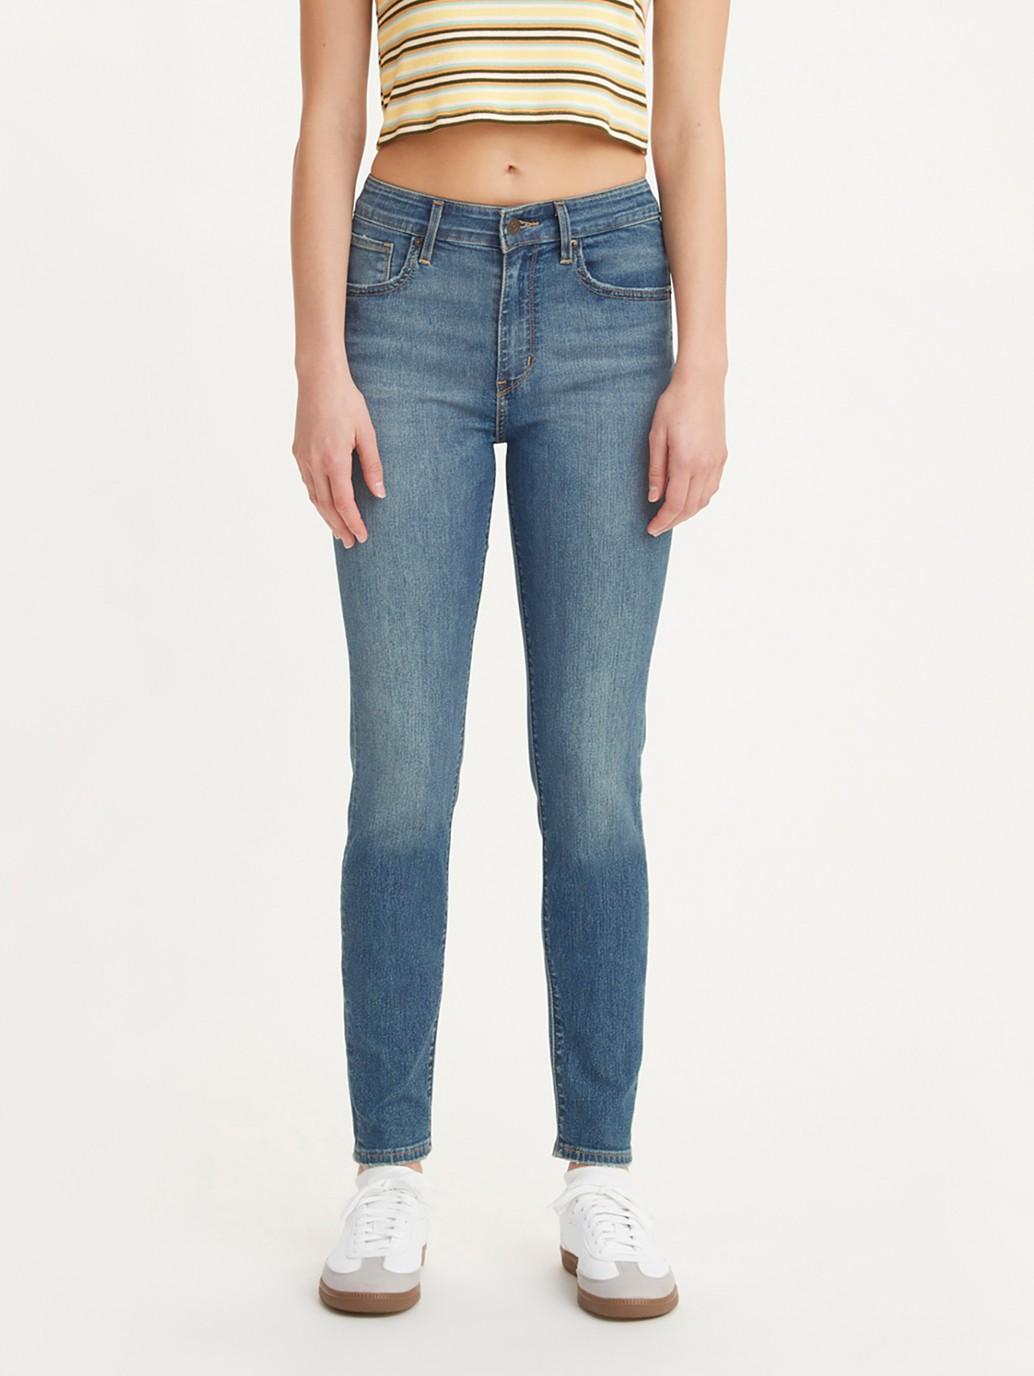 Buy Levi's® Women's 721 High-Rise Skinny Jeans | Levi’s® Official ...